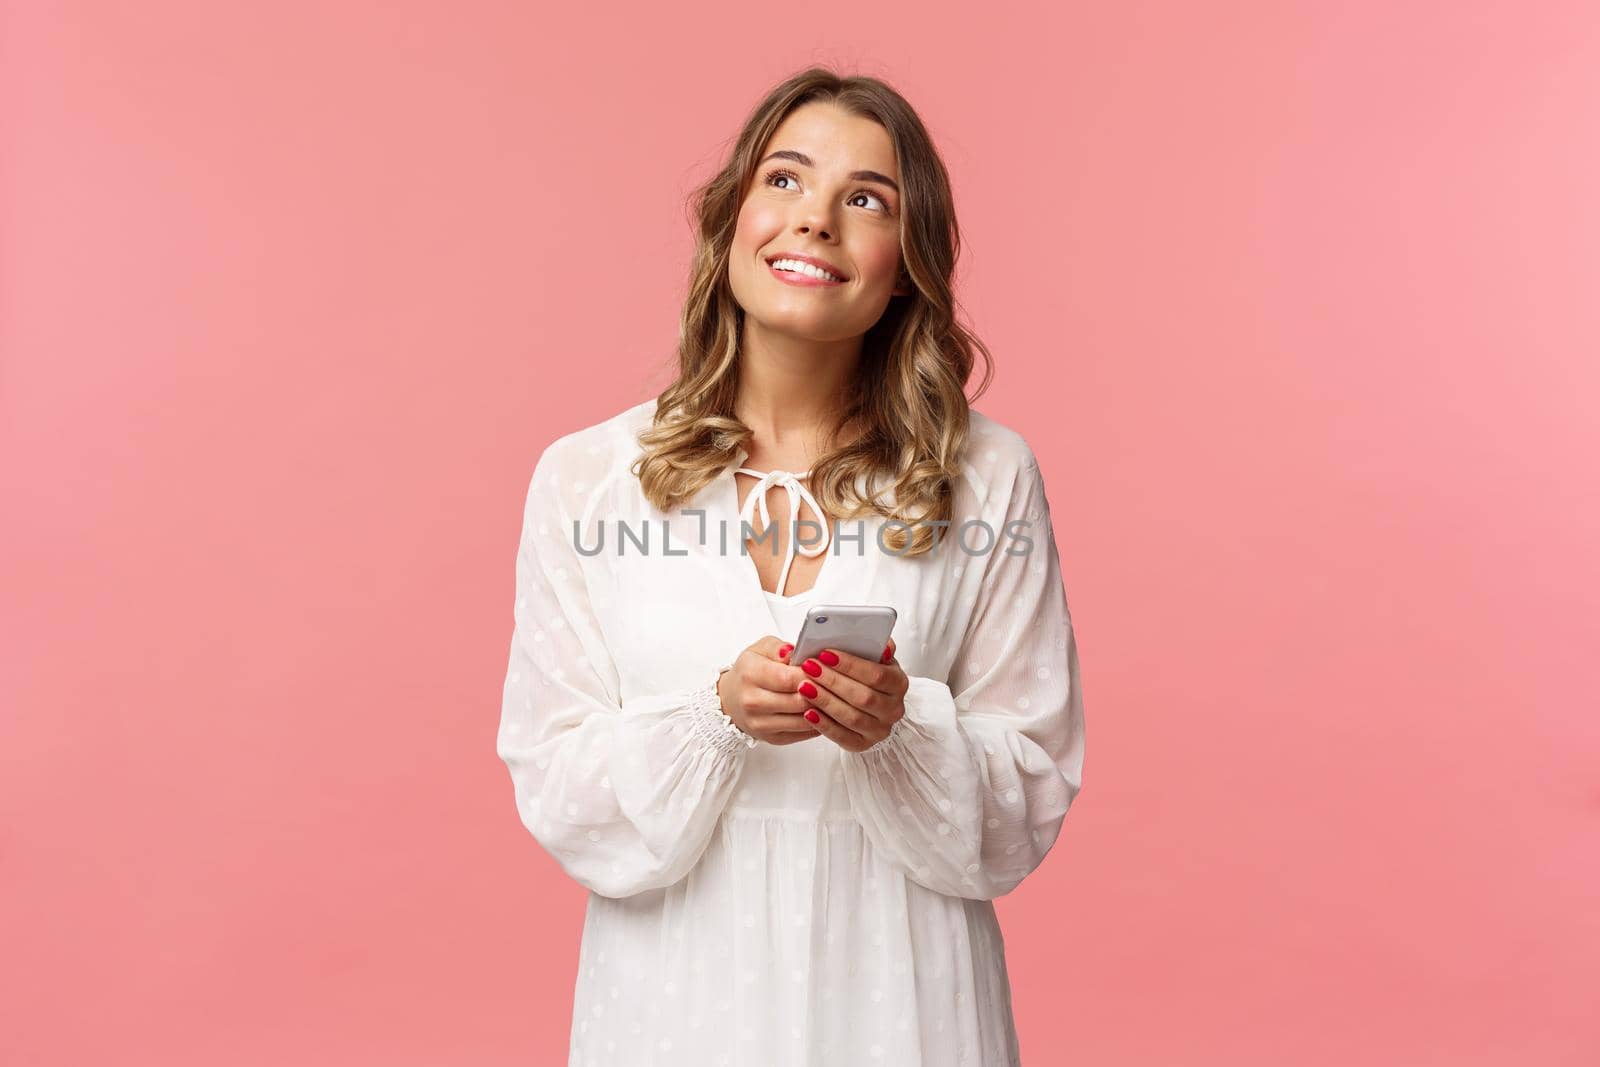 Portrait of dreamy young pretty blond girl fantasizing about something beautiful, looking up thoughtful and happy smiling, holding mobile phone, messaging, shopping online, pink background.